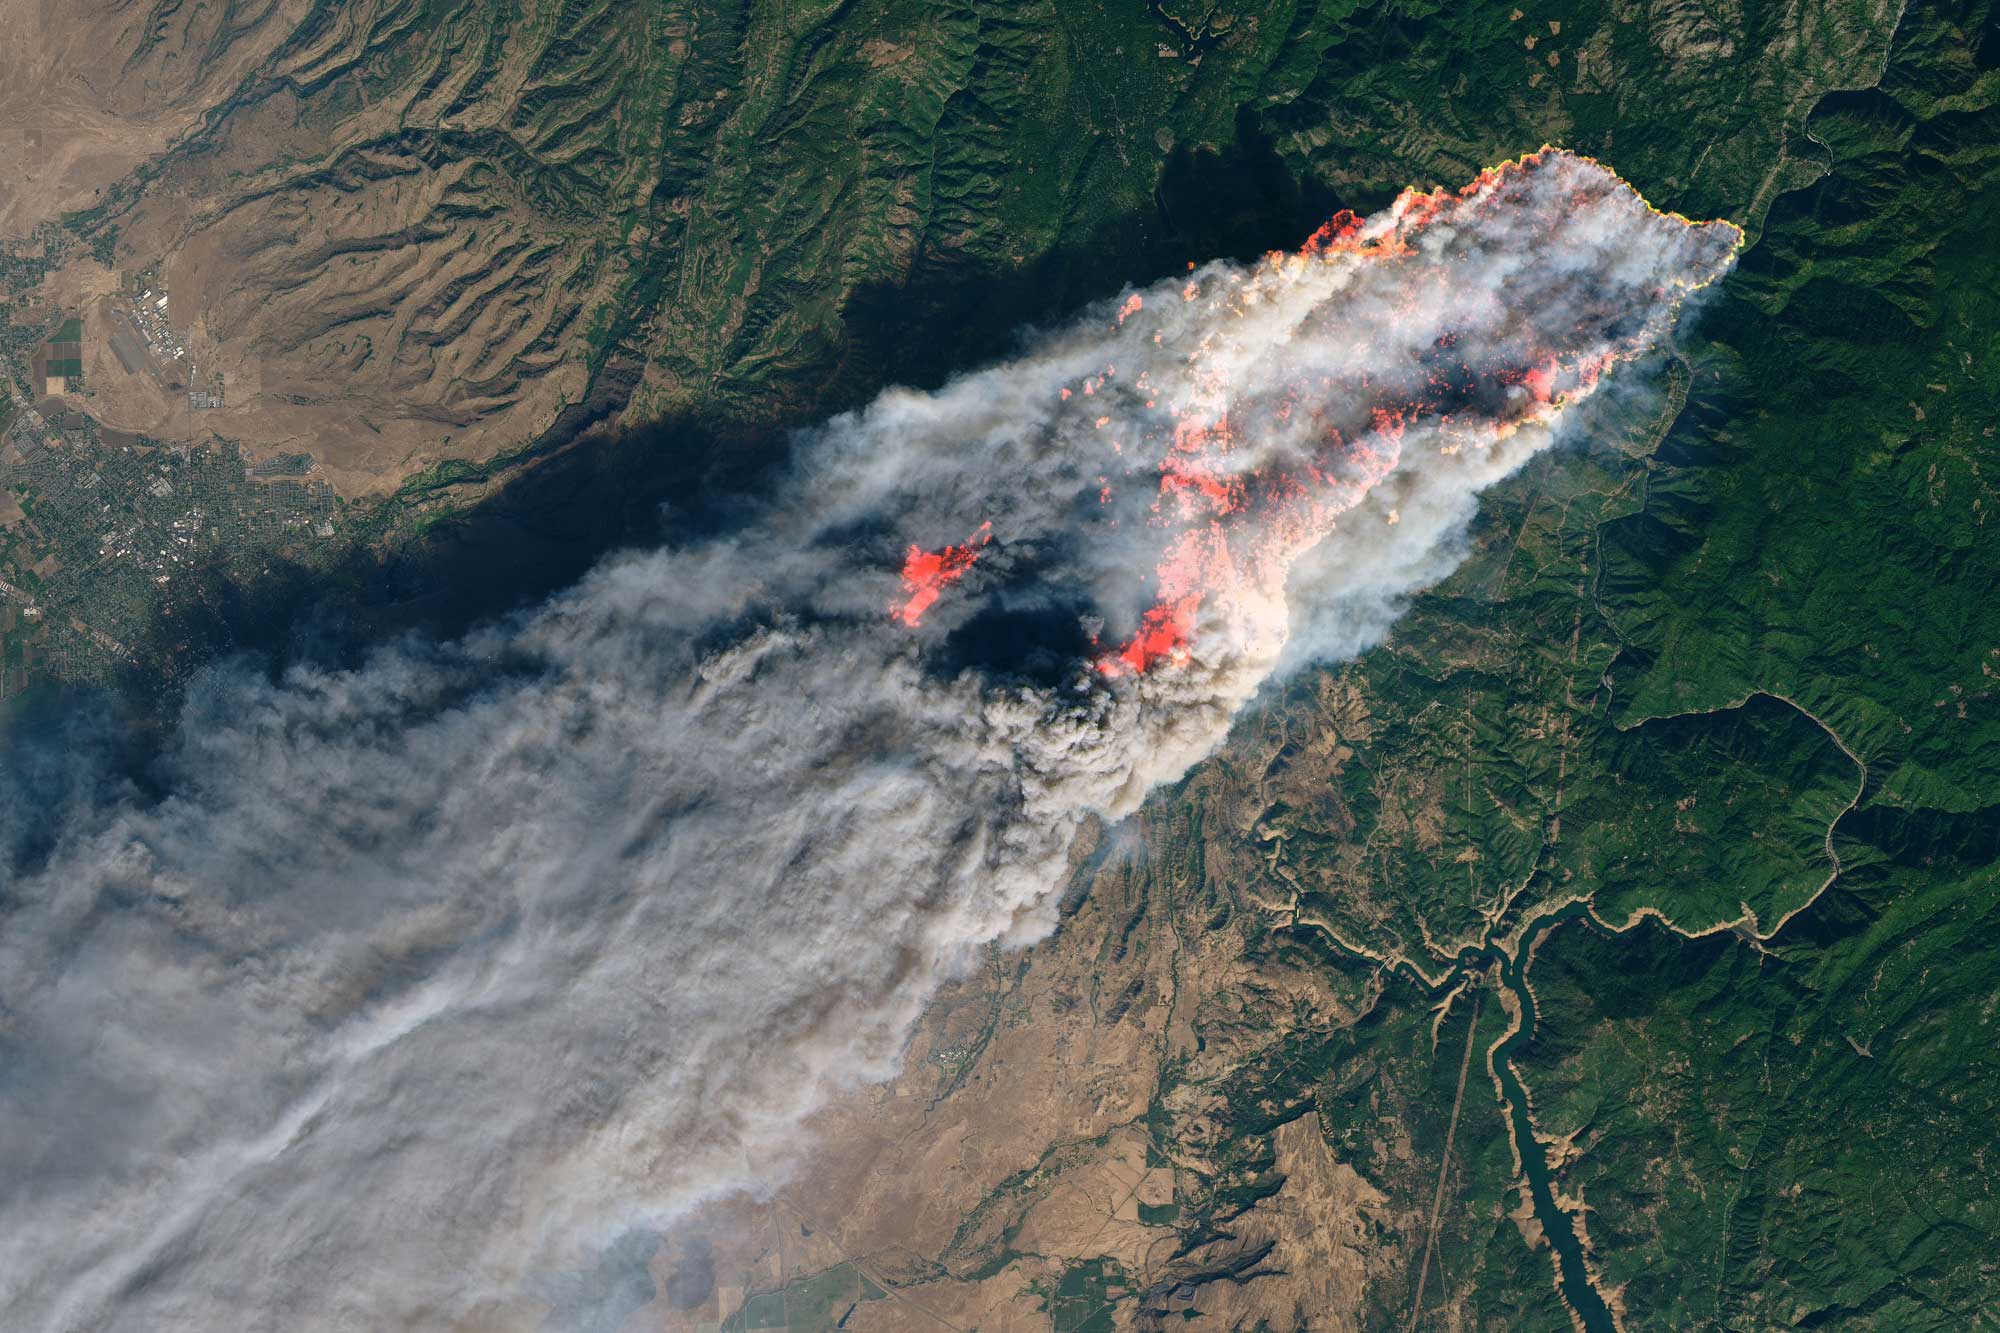 Satellite image showing a plume of smoke on a rugged landscape around Paradise, California, in November 2018. The smoke runs from the upper right to the lower left of the image. In the center of the image, orange areas can be see within the smoke plume. These are areas that are burning as indicated by viewing them in infrared light.